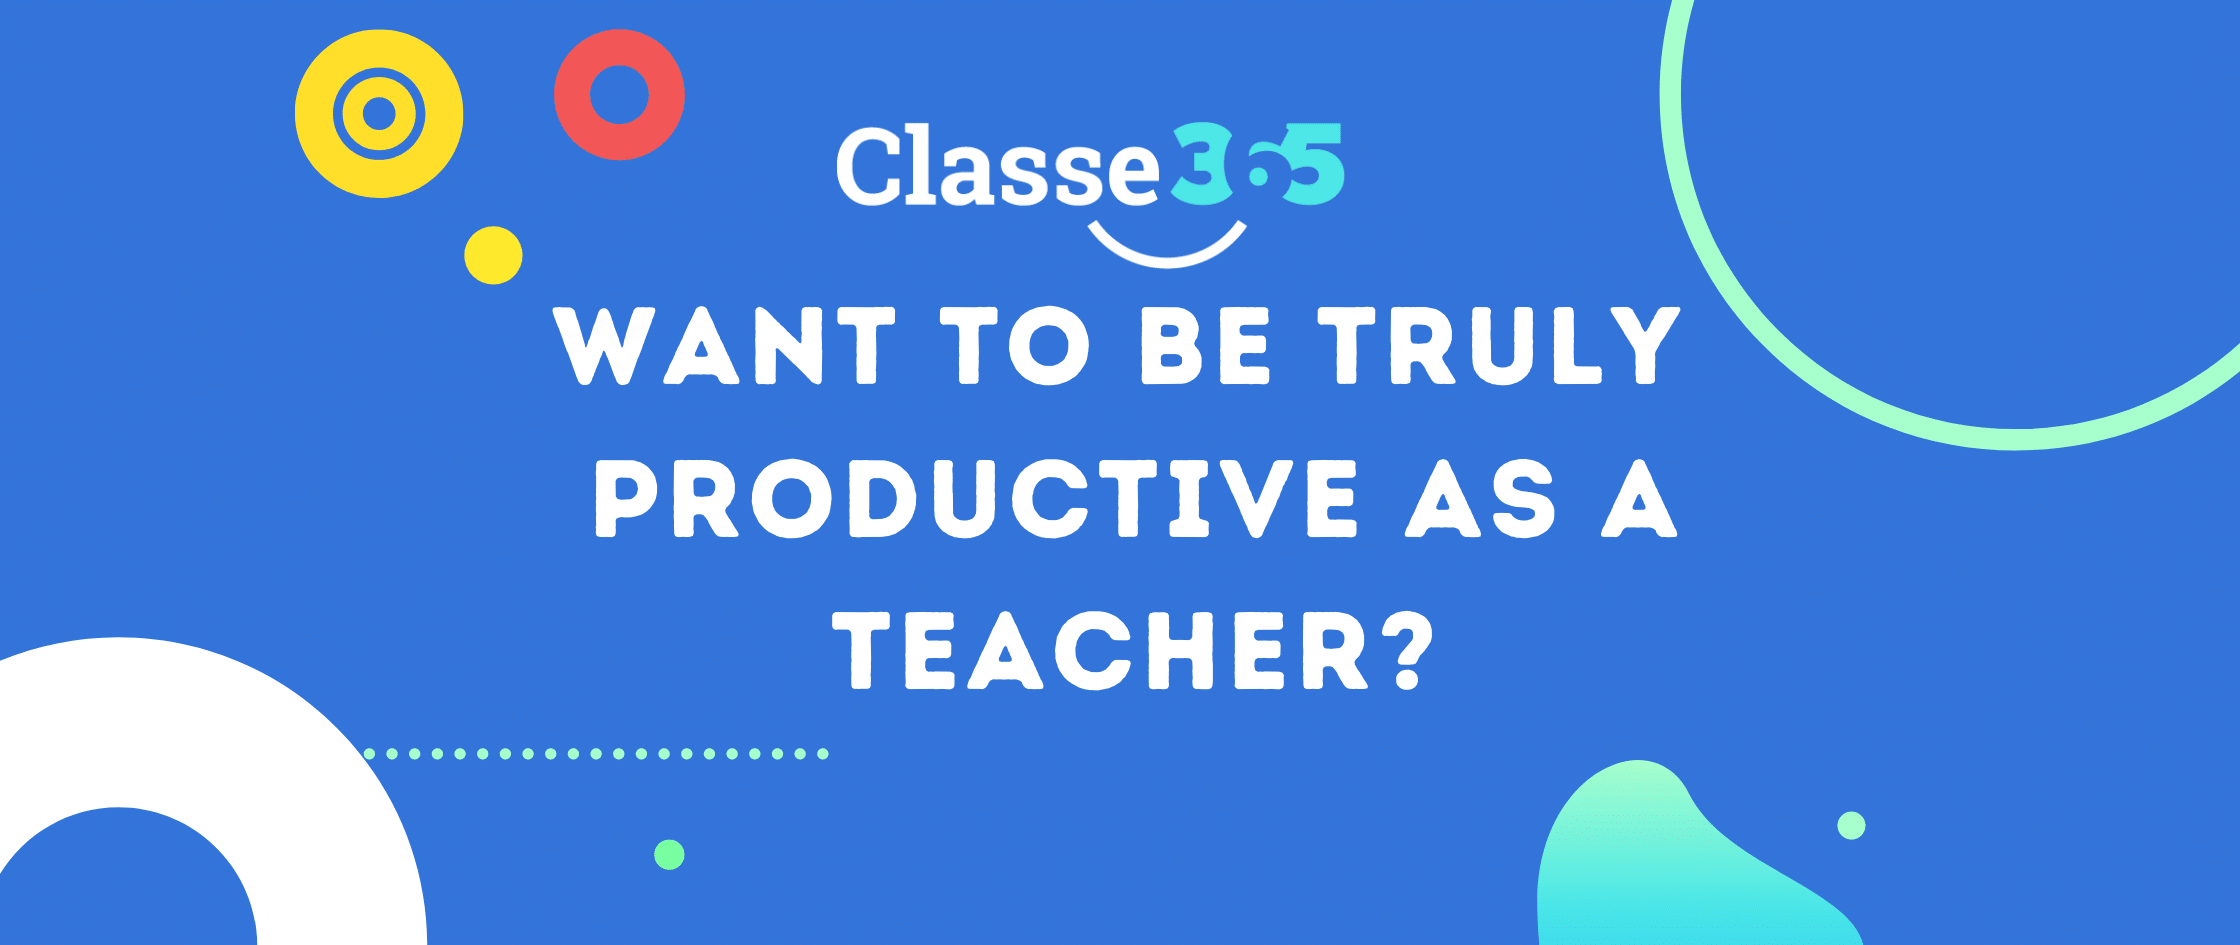 WANT TO BE TRULY PRODUCTIVE AS A TEACHER_ (2)